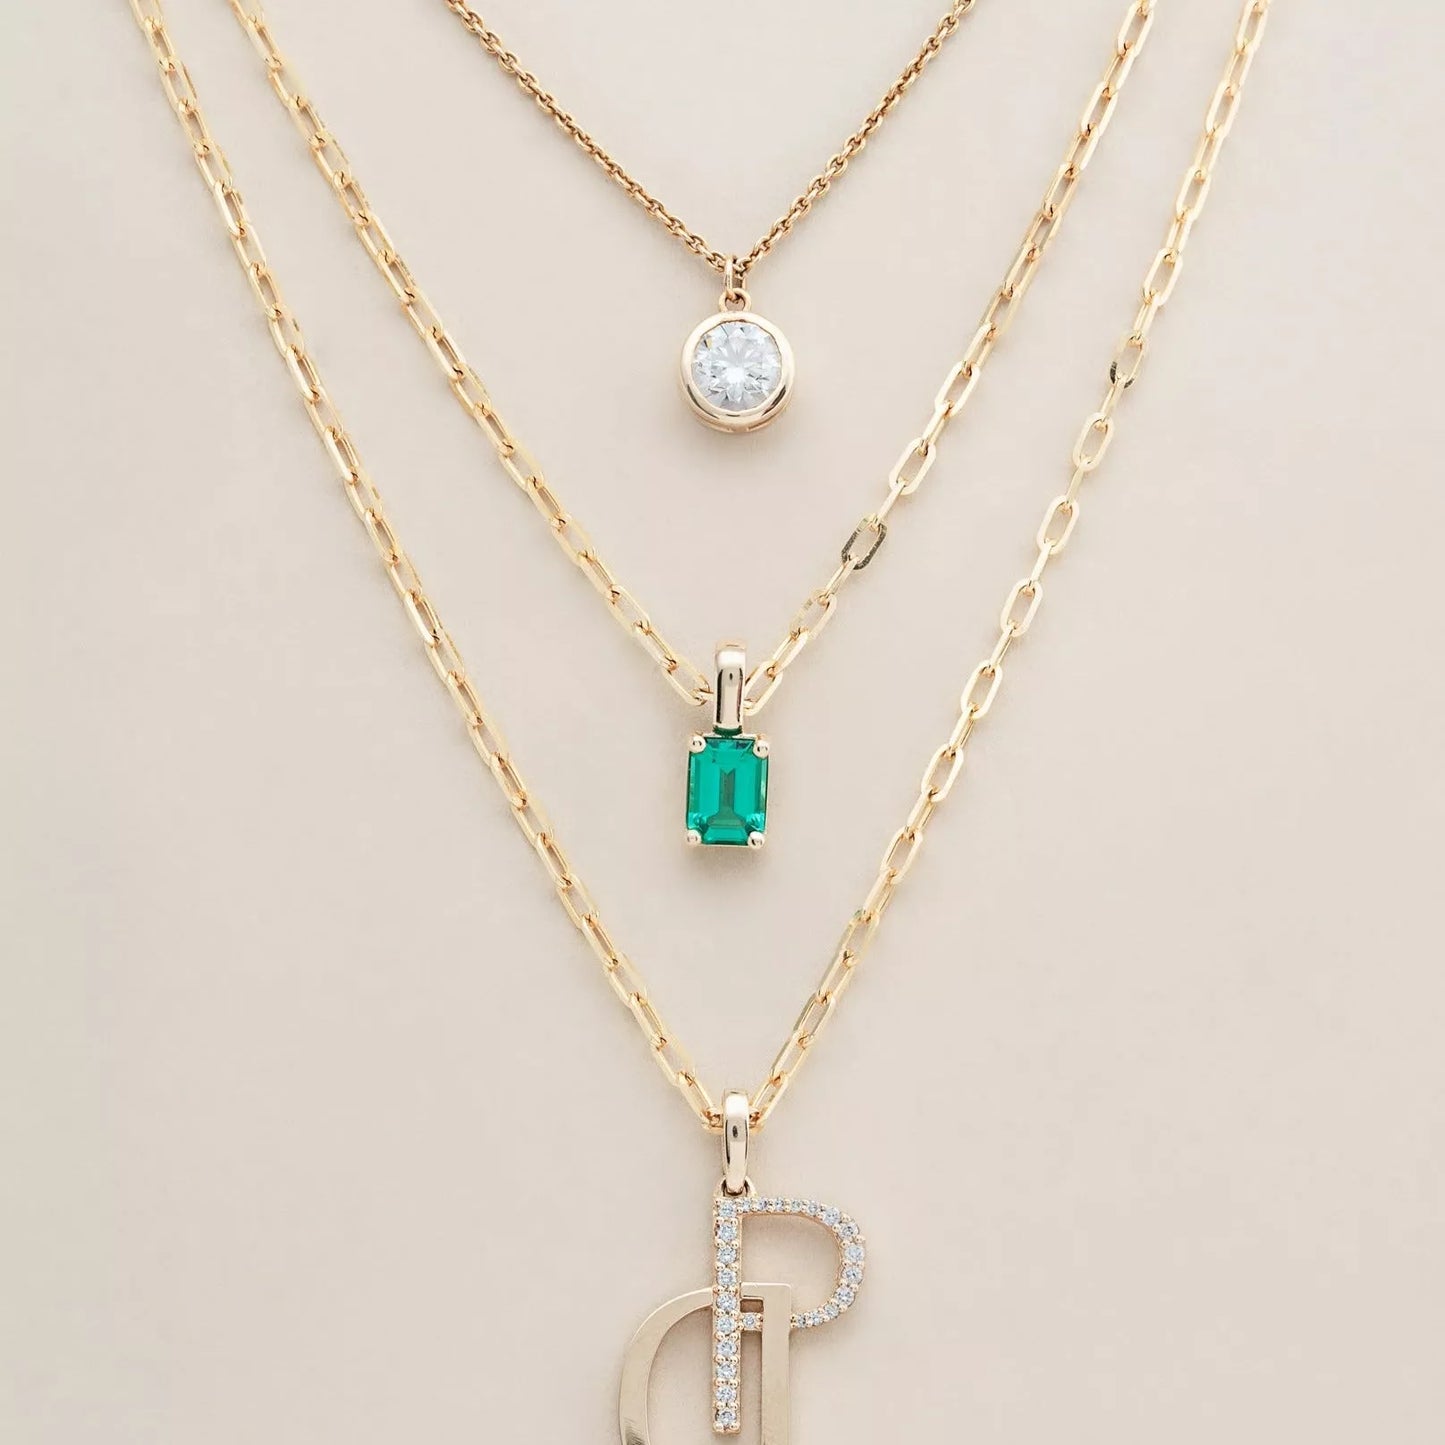 The Green Emerald Charm Necklace